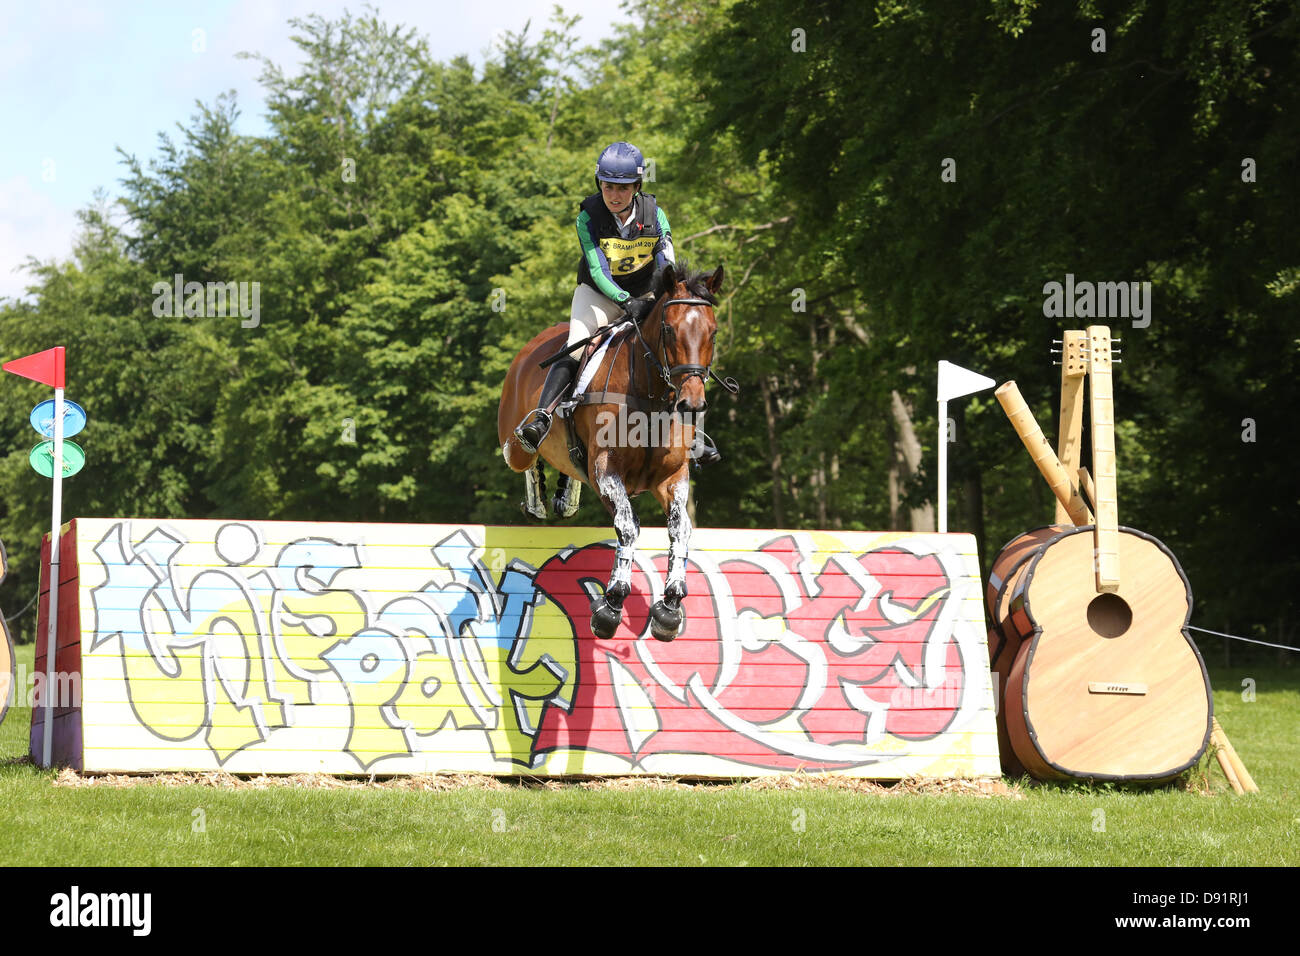 Leeds Bramham UK. 8th June 2013. Millie Dumas riding Action packed clears the Leeds Festival jump during the cross country event at the 40th Bramham horse trials, the annual Leeds Festival is held at the same site in August. Credit: S D Schofield/Alamy Live News Stock Photo